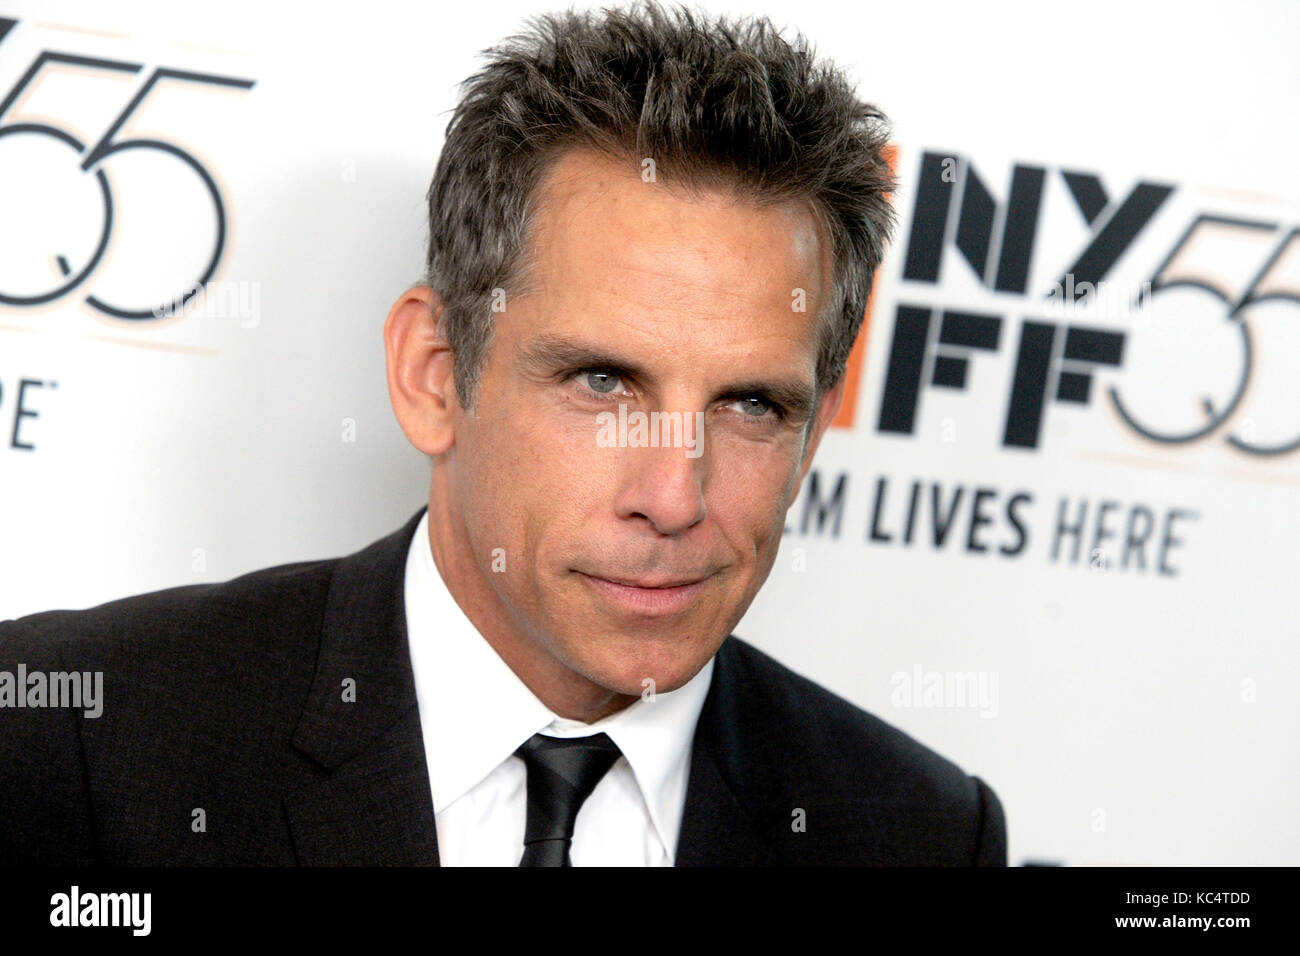 Ben Stiller attends 'The Meyerowitz Stories' premiere during the 55th New York Film Festival at Alice Tully Hall on October 1, 2017 in New York City. Stock Photo